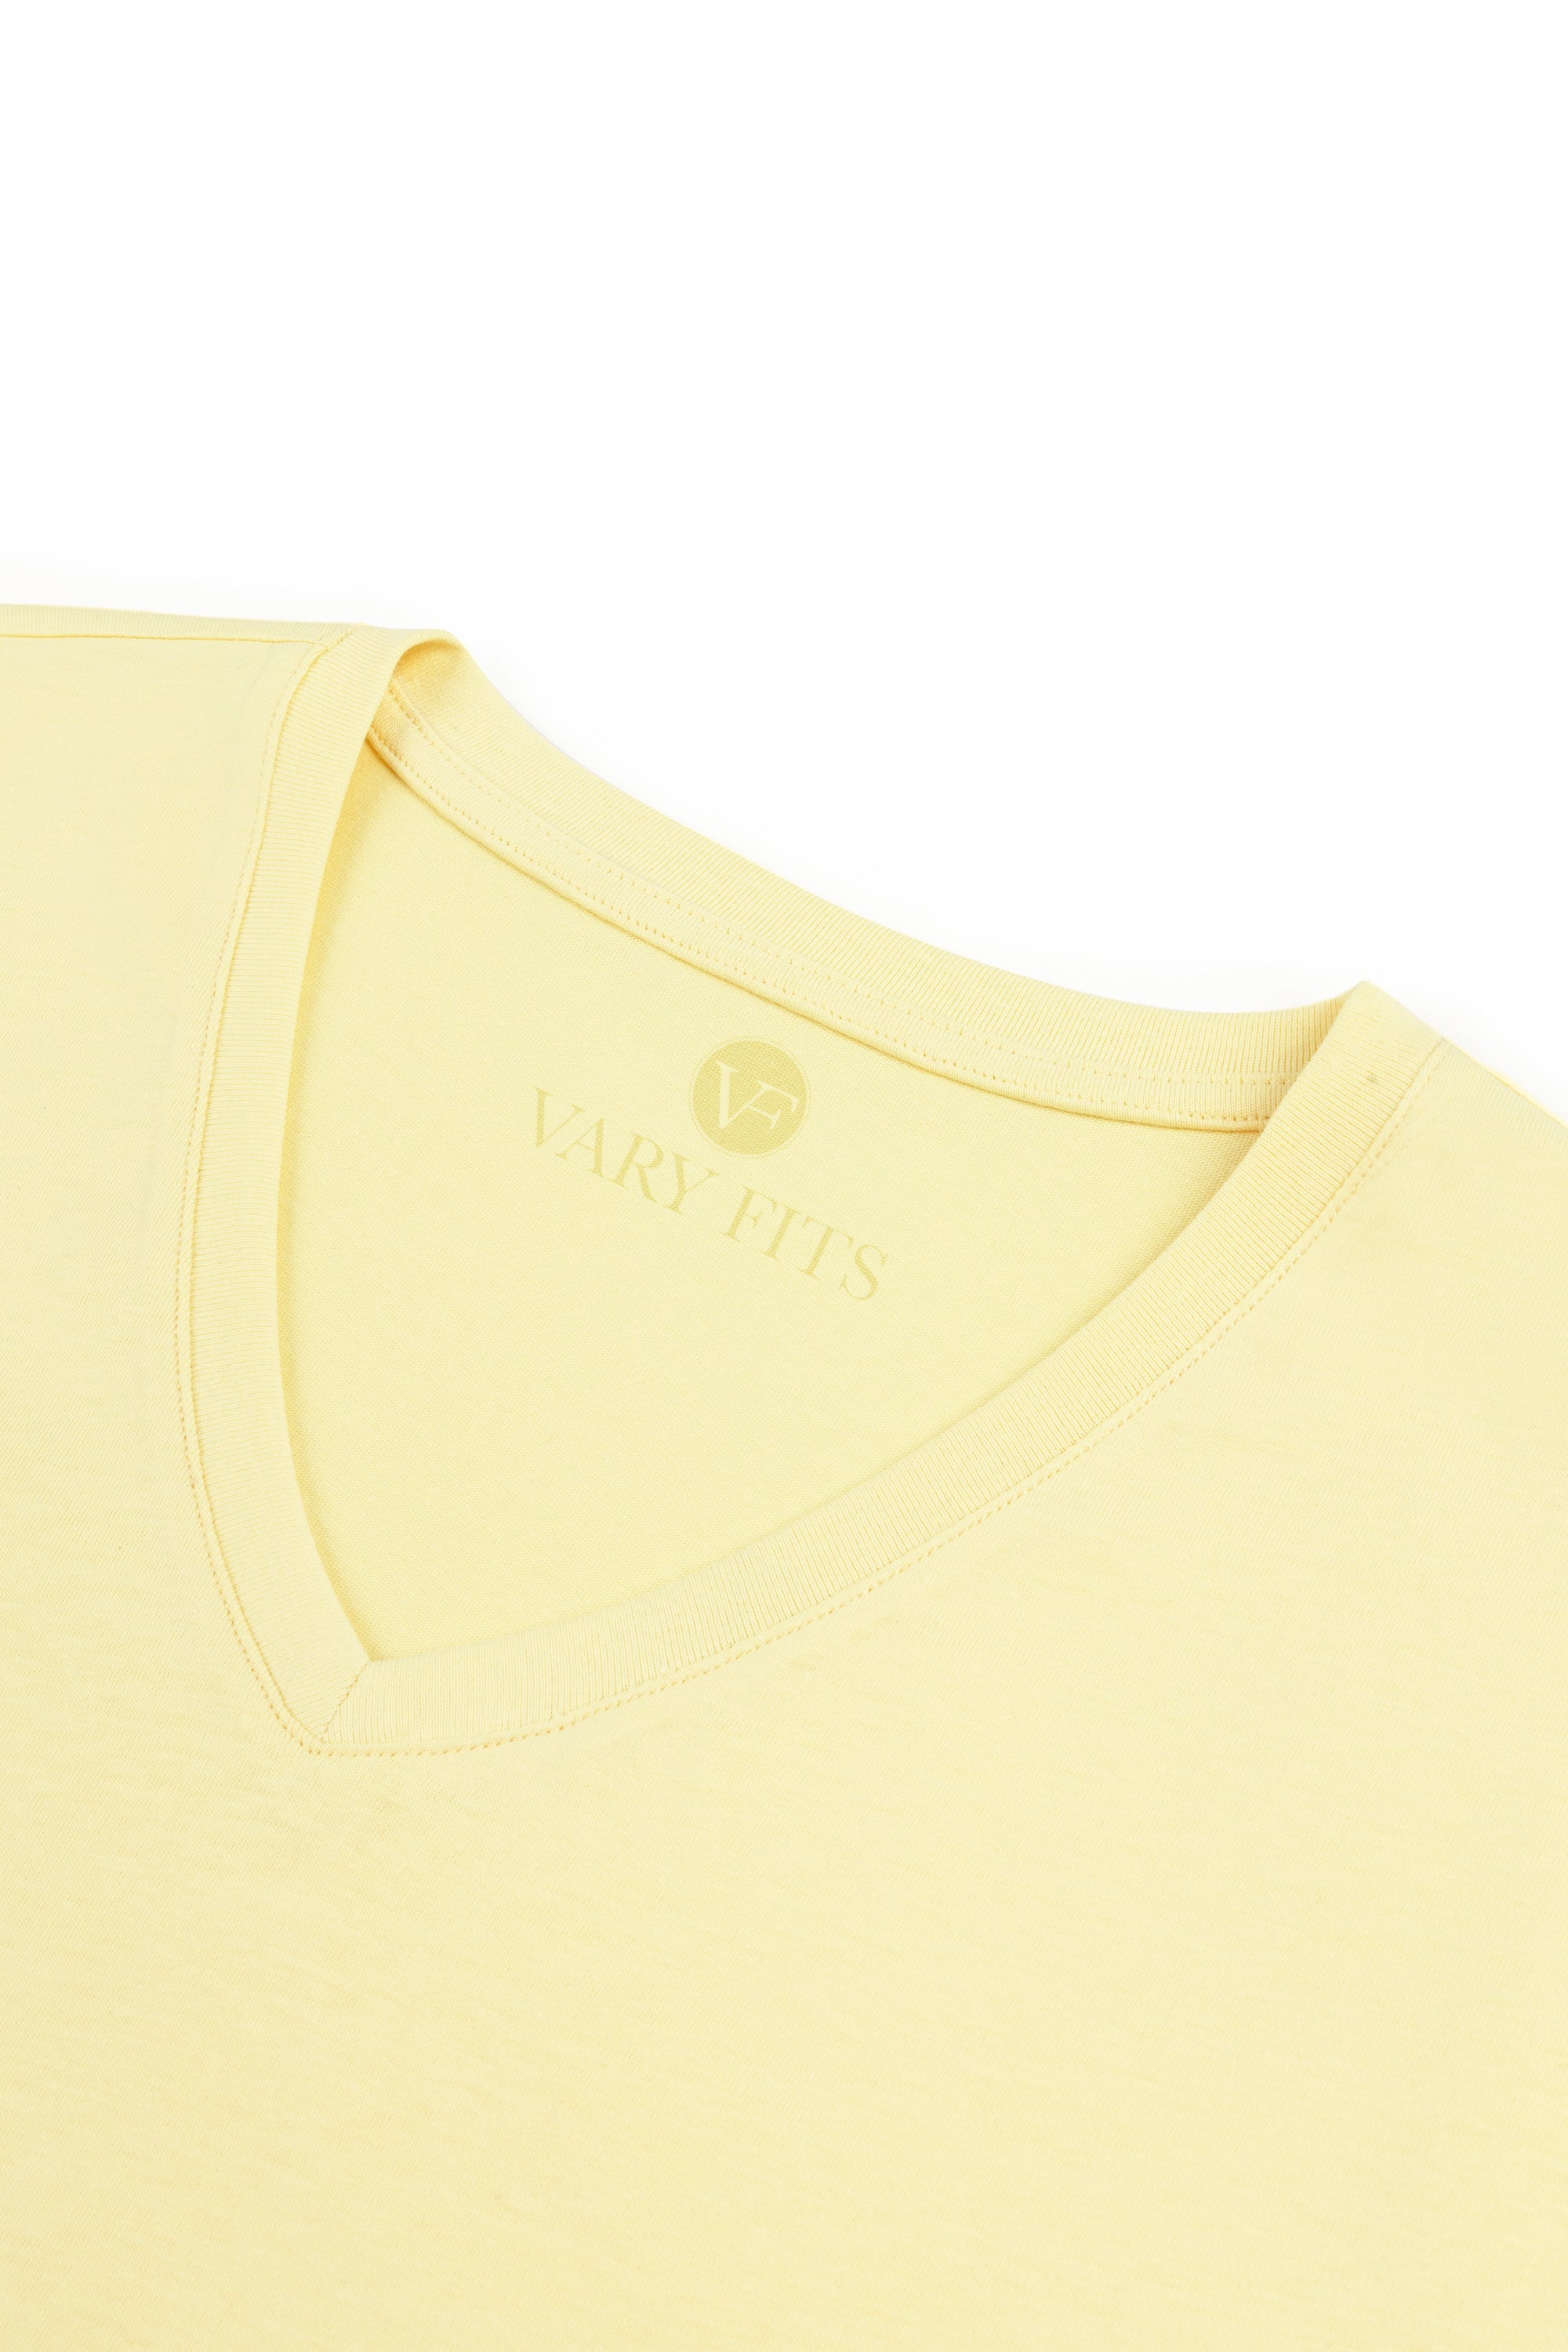 Ajax Faded Yellow T-Shirt For Man | Vary Fits